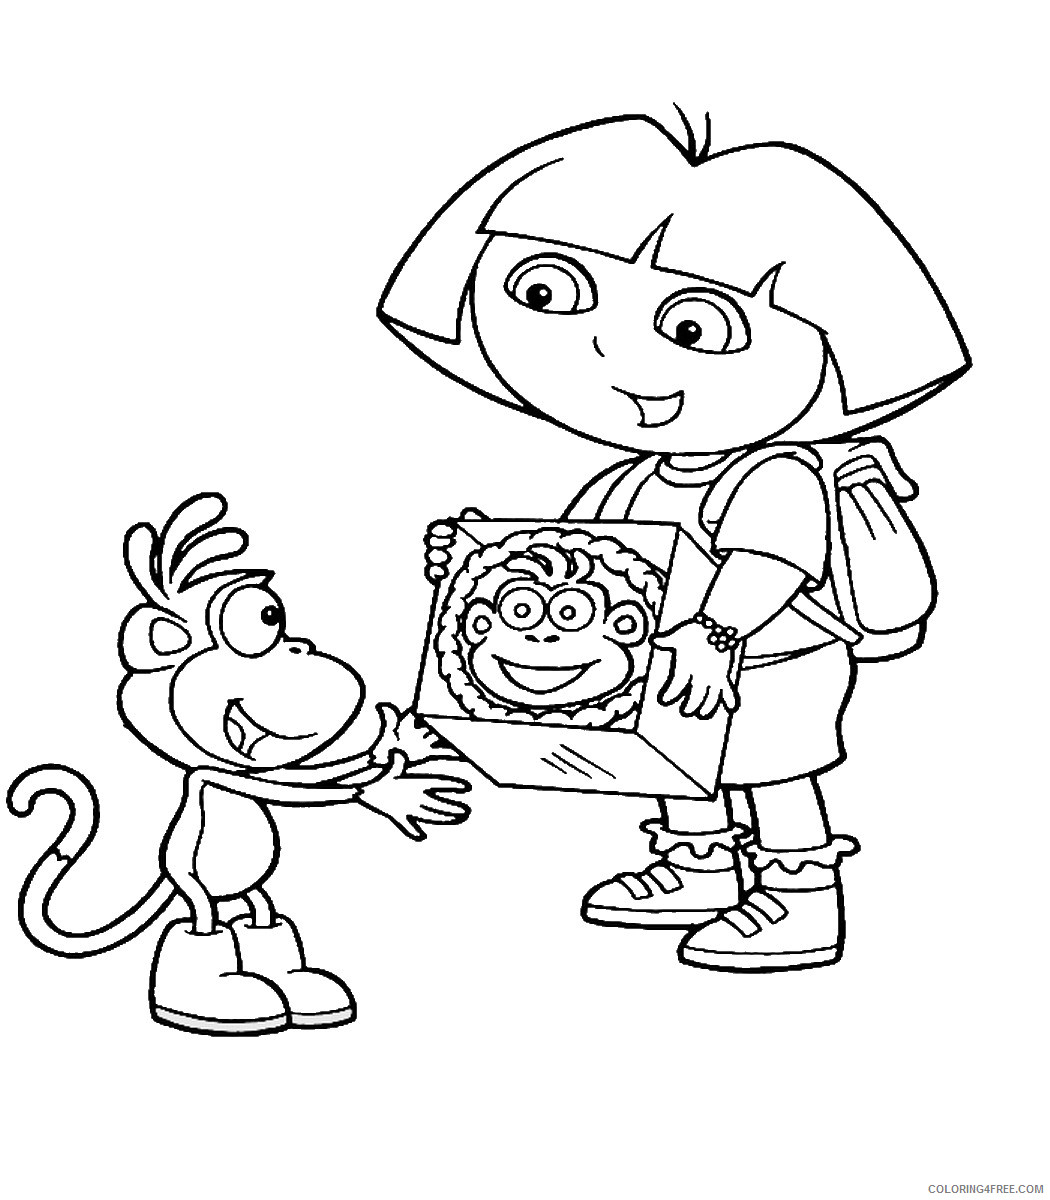 Dora the Explorer Coloring Pages Cartoons cl_dora52 Printable 2020 2635 Coloring4free